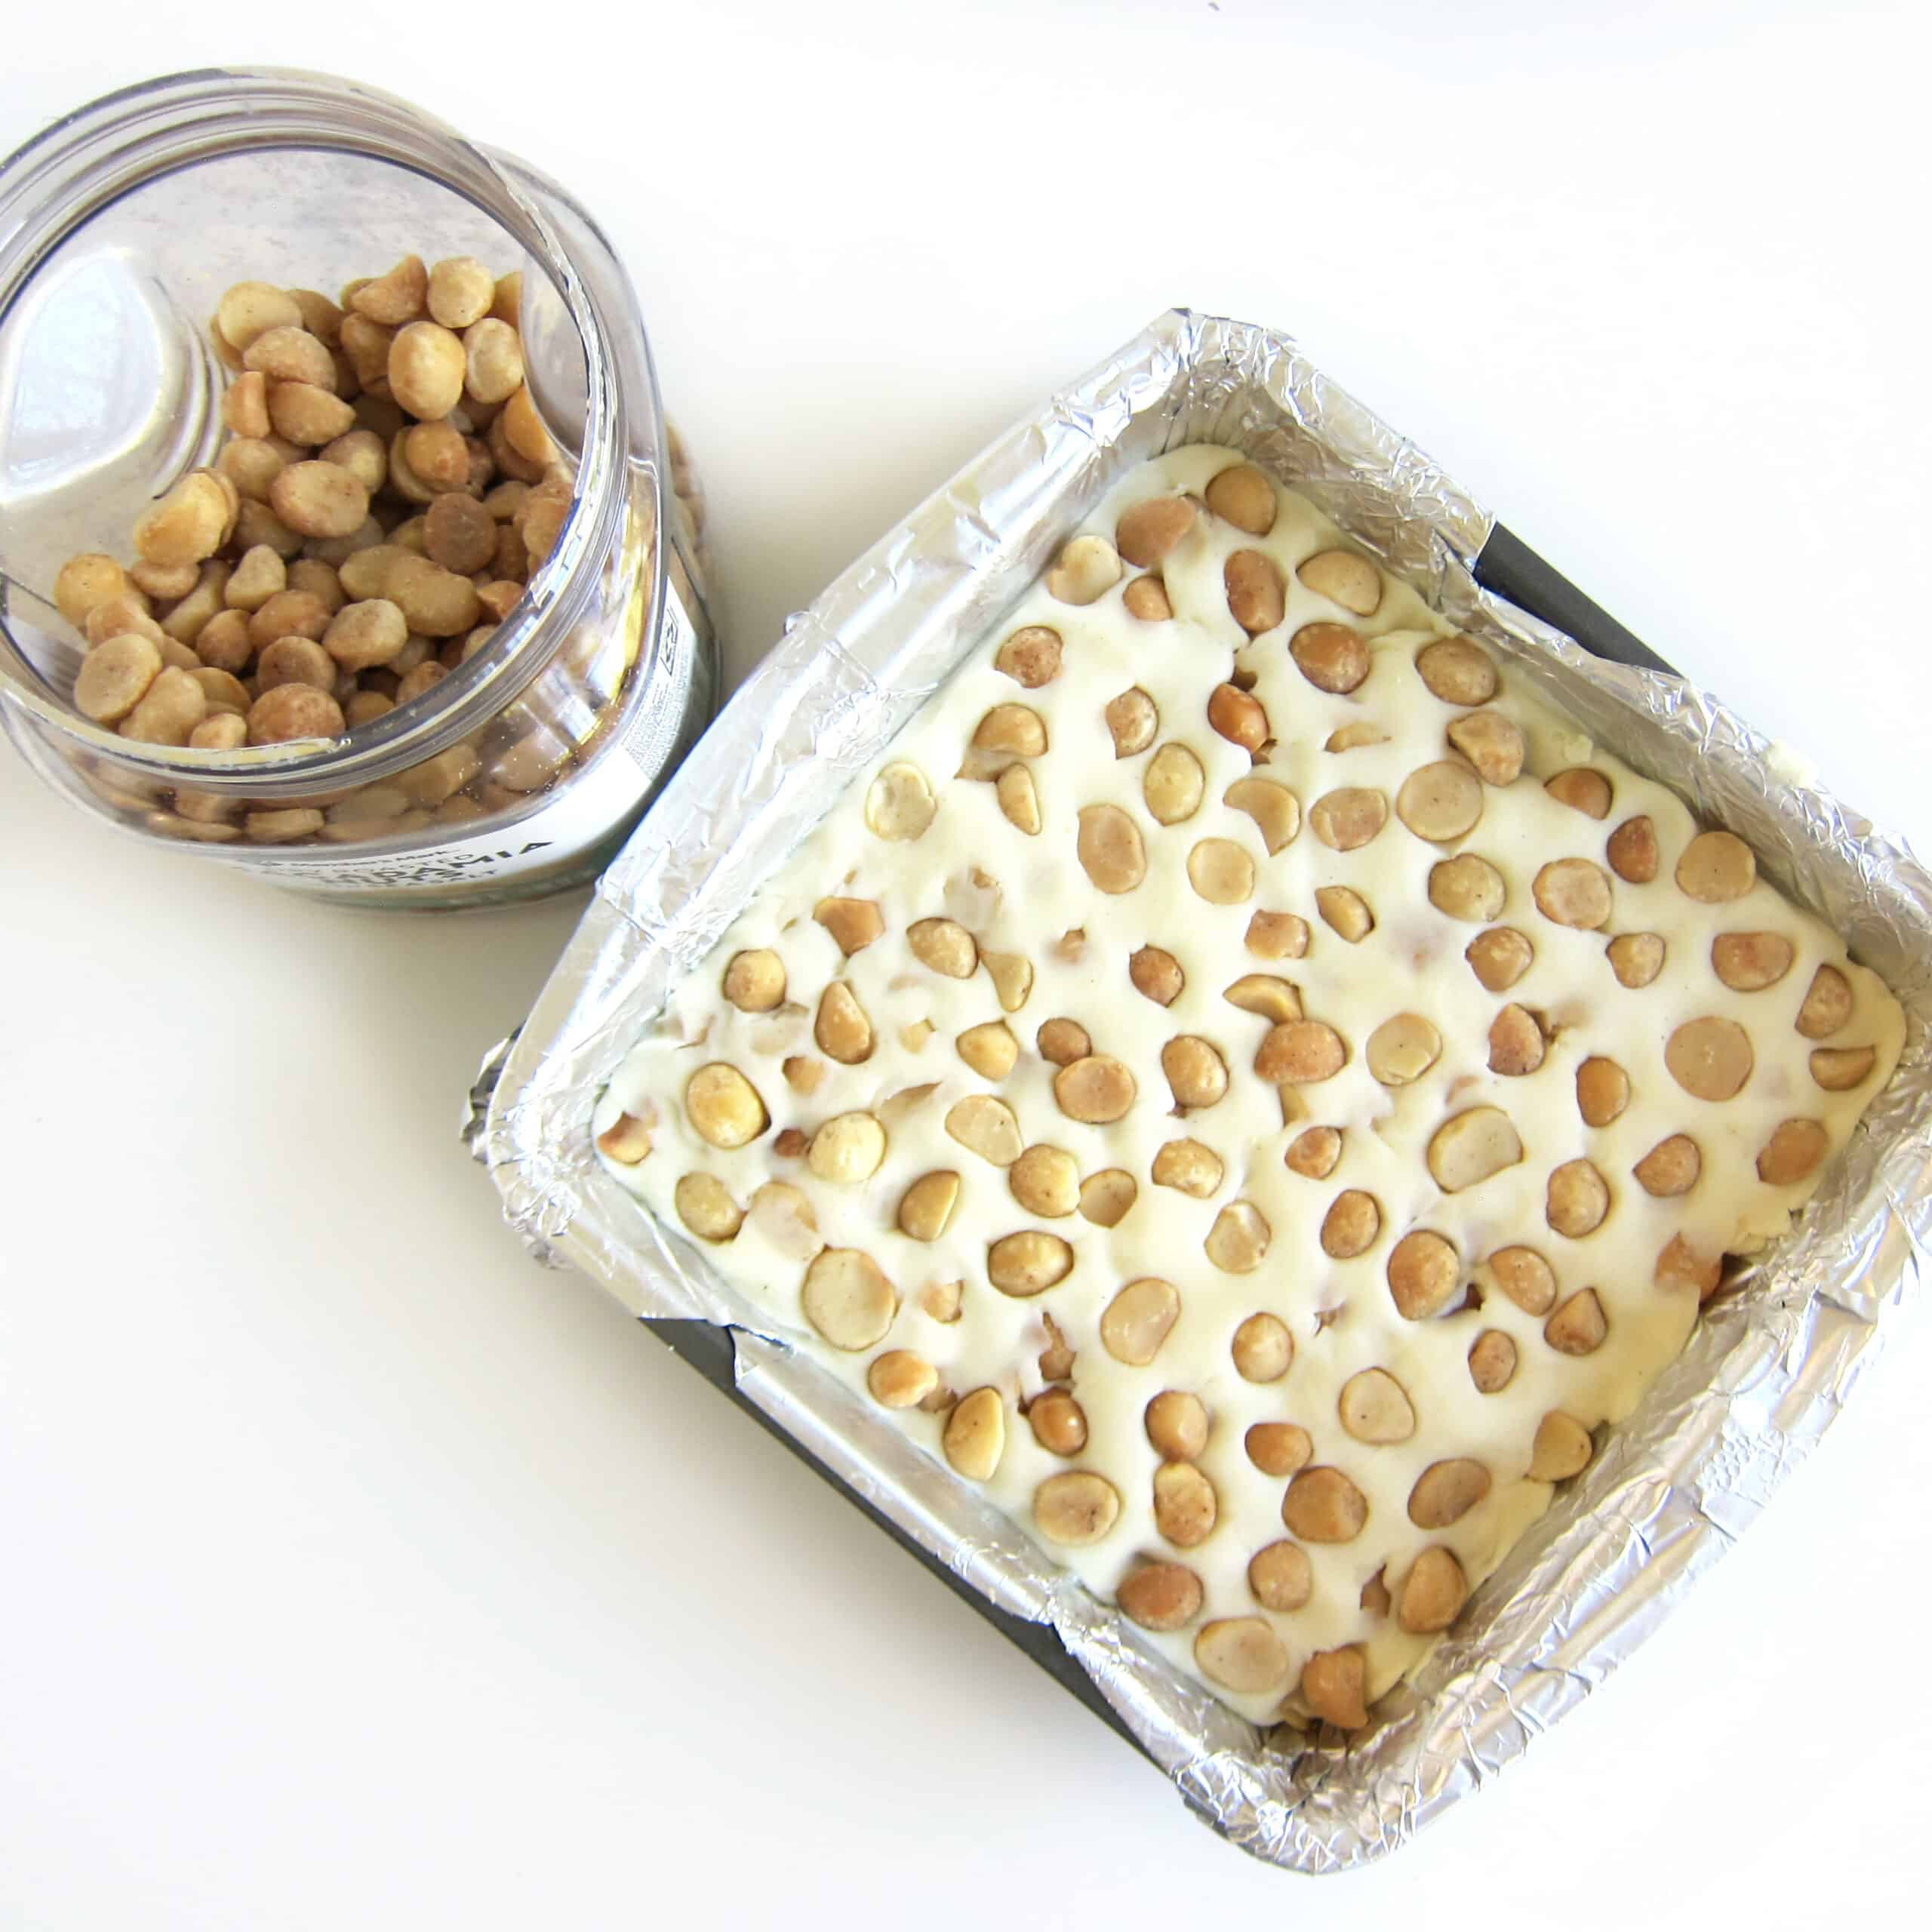 White chocolate fudge filled with macadamia nuts.